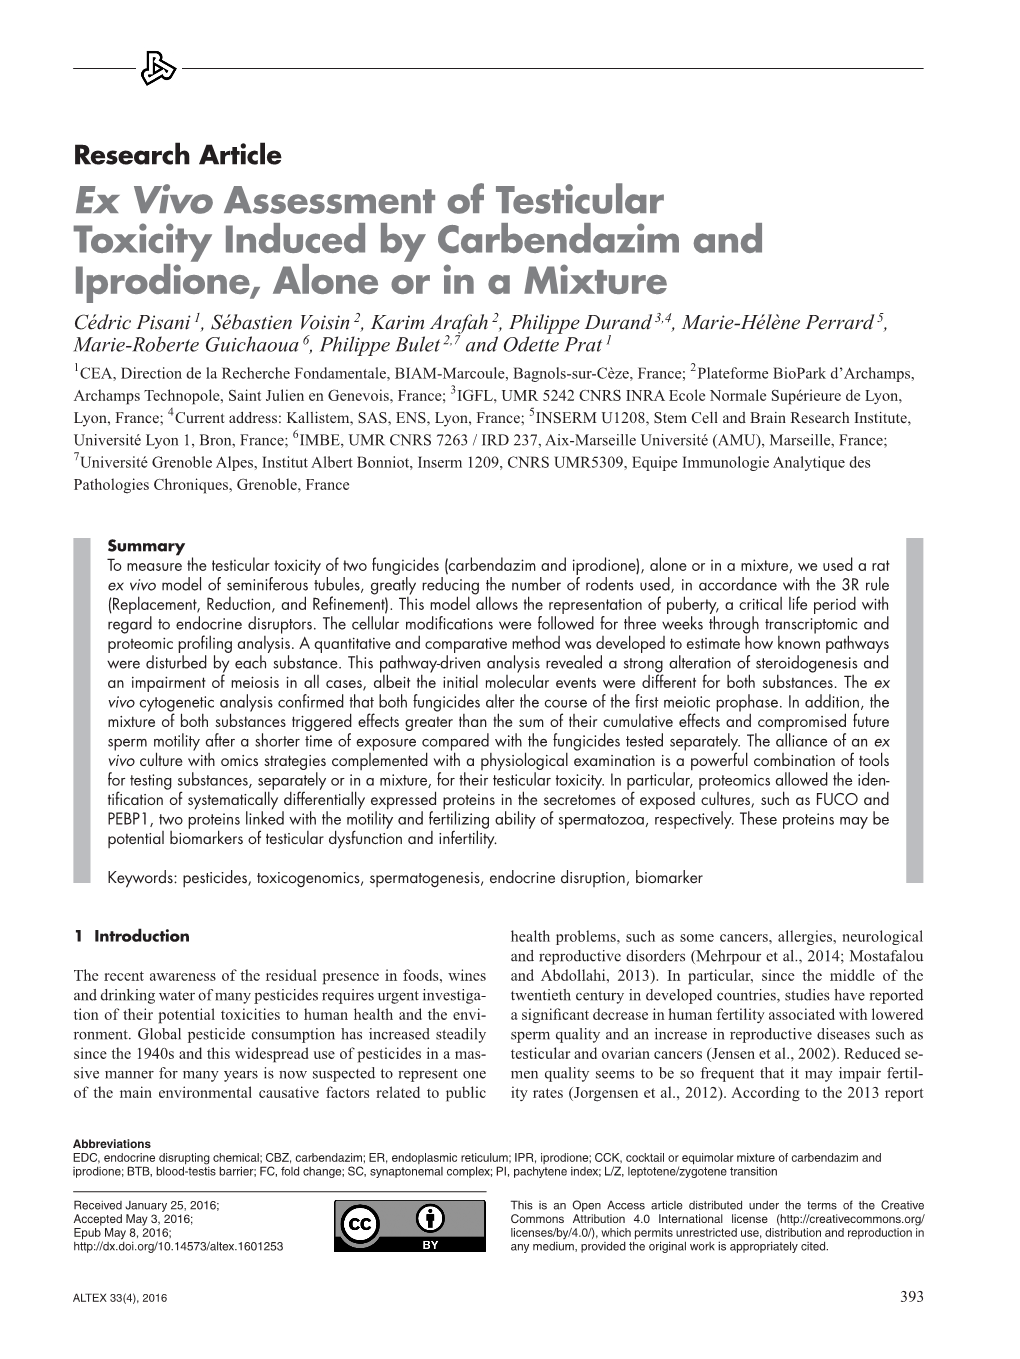 Ex Vivo Assessment of Testicular Toxicity Induced by Carbendazim